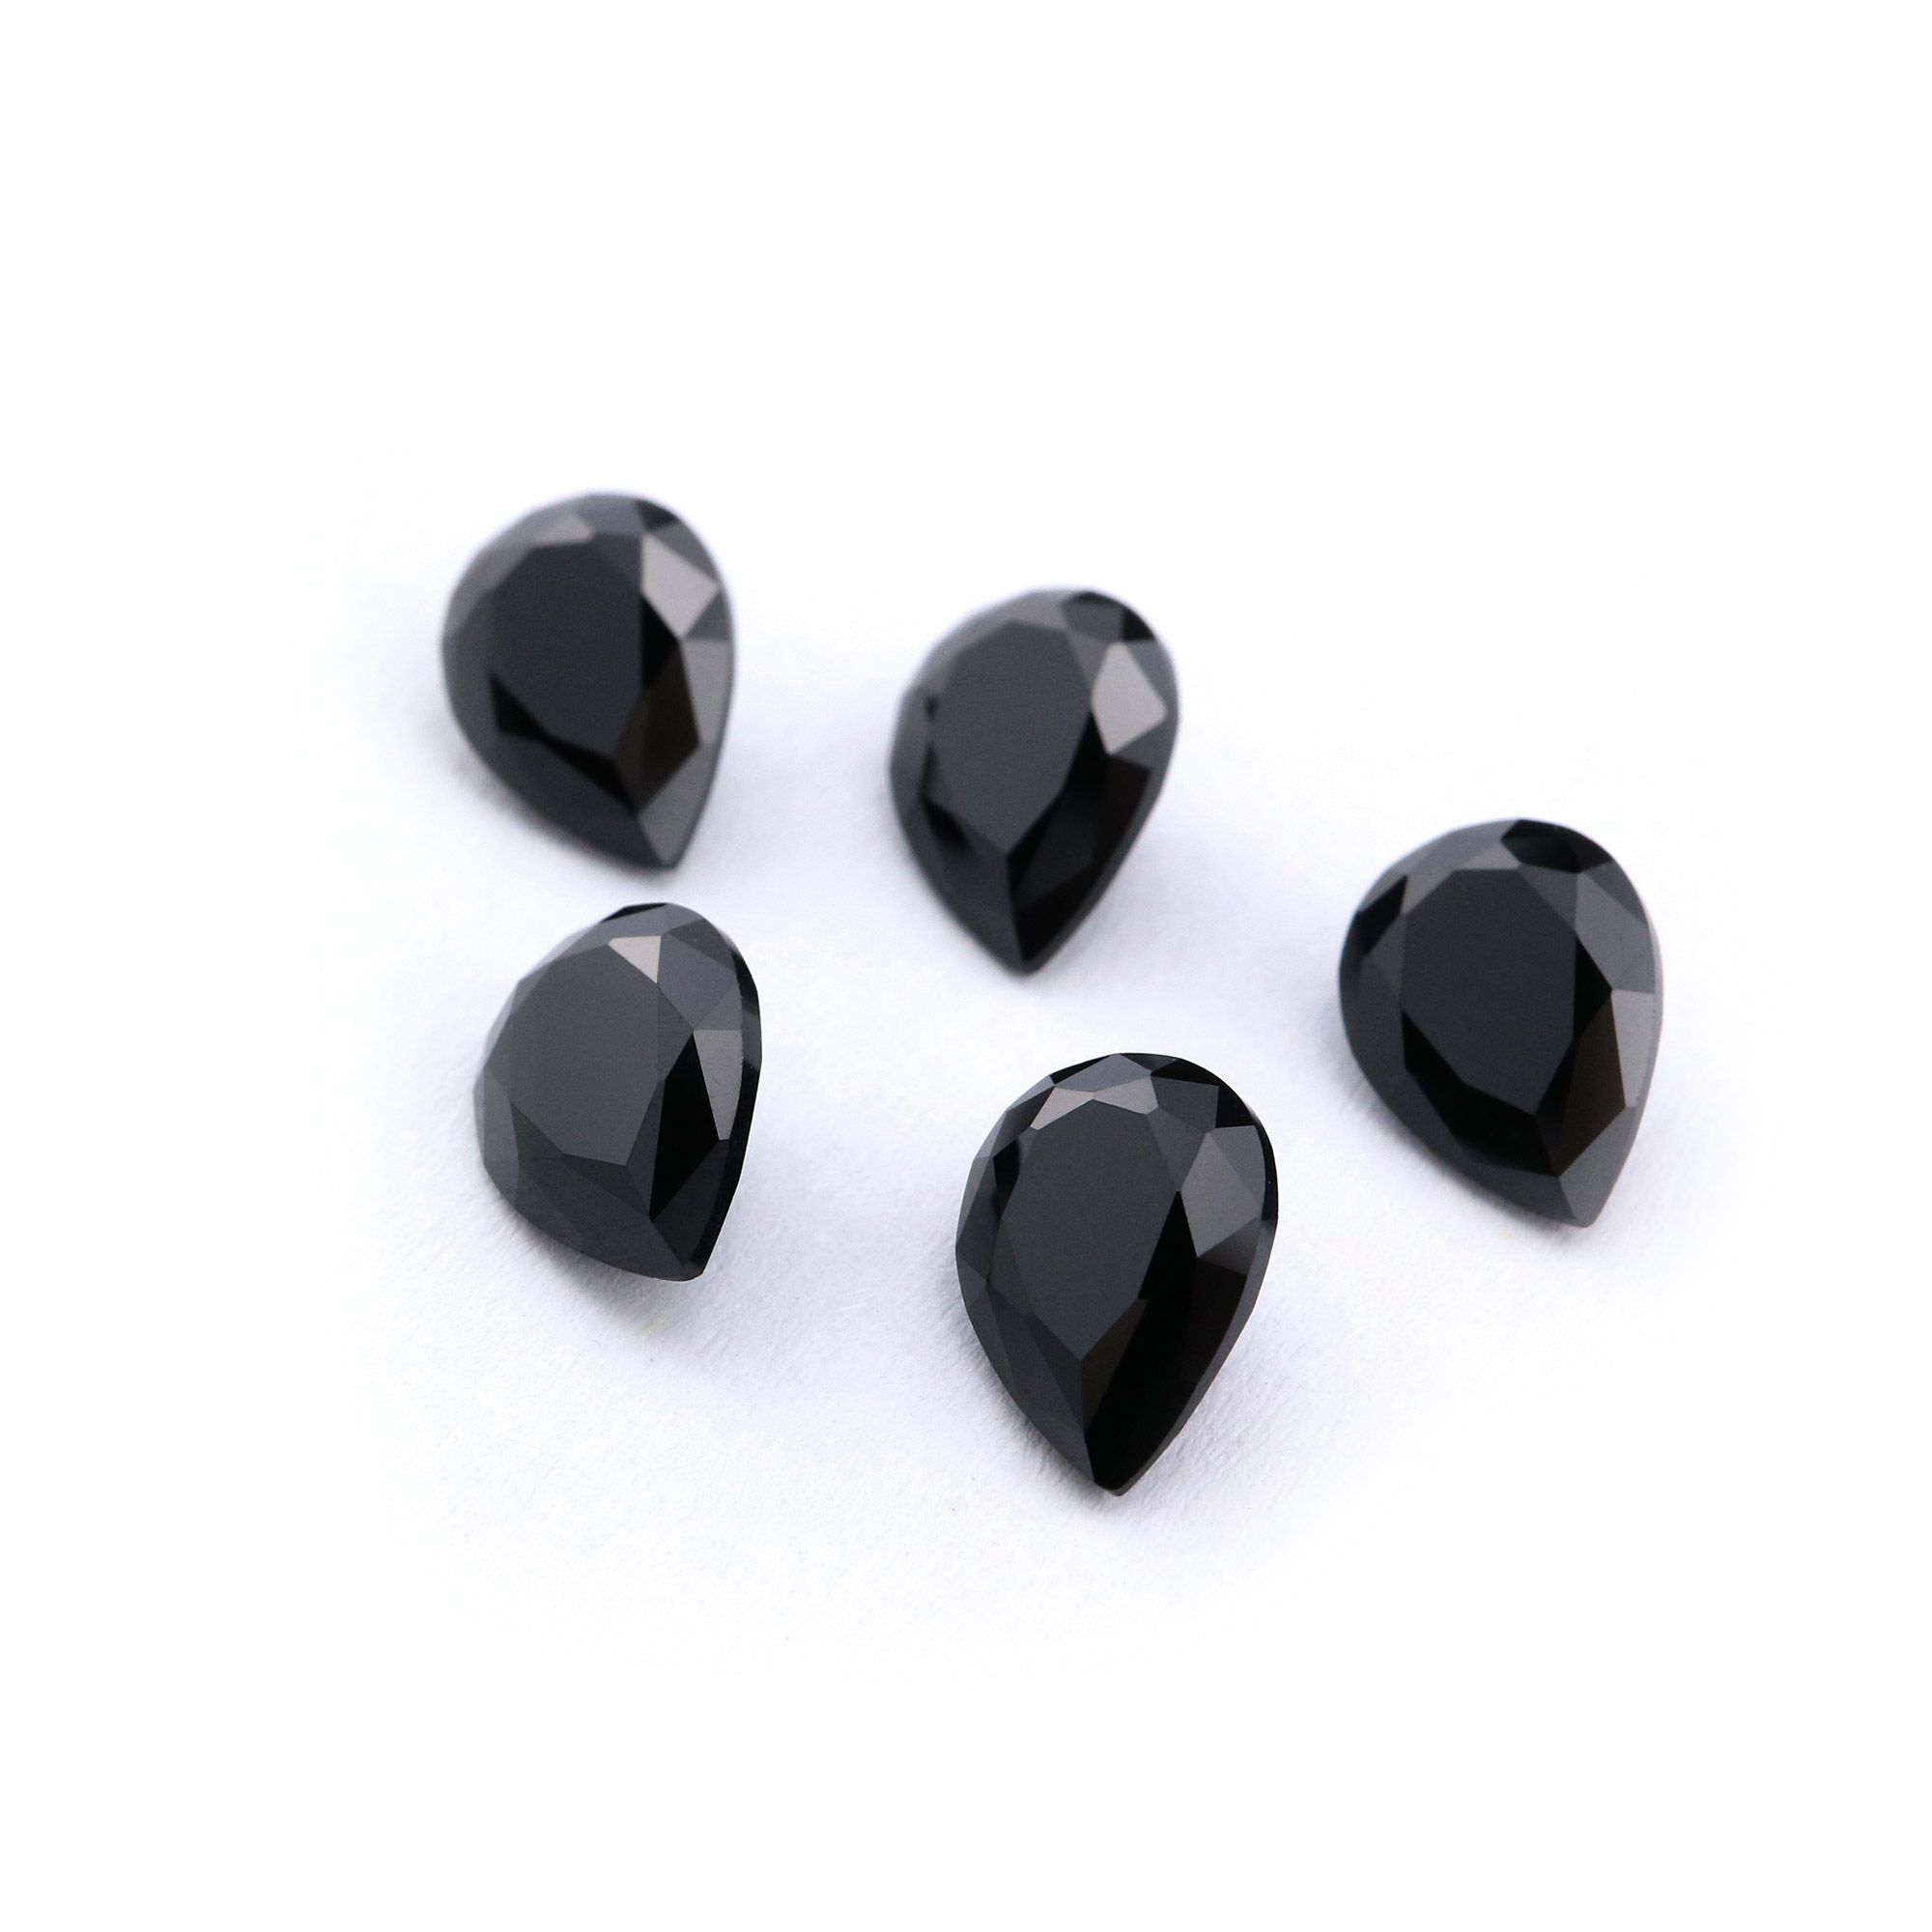 5Pcs Pear Black Spinel Faceted Cut Loose Gemstone Natural Semi Precious Stone DIY Jewelry Supplies 4150007 - Click Image to Close